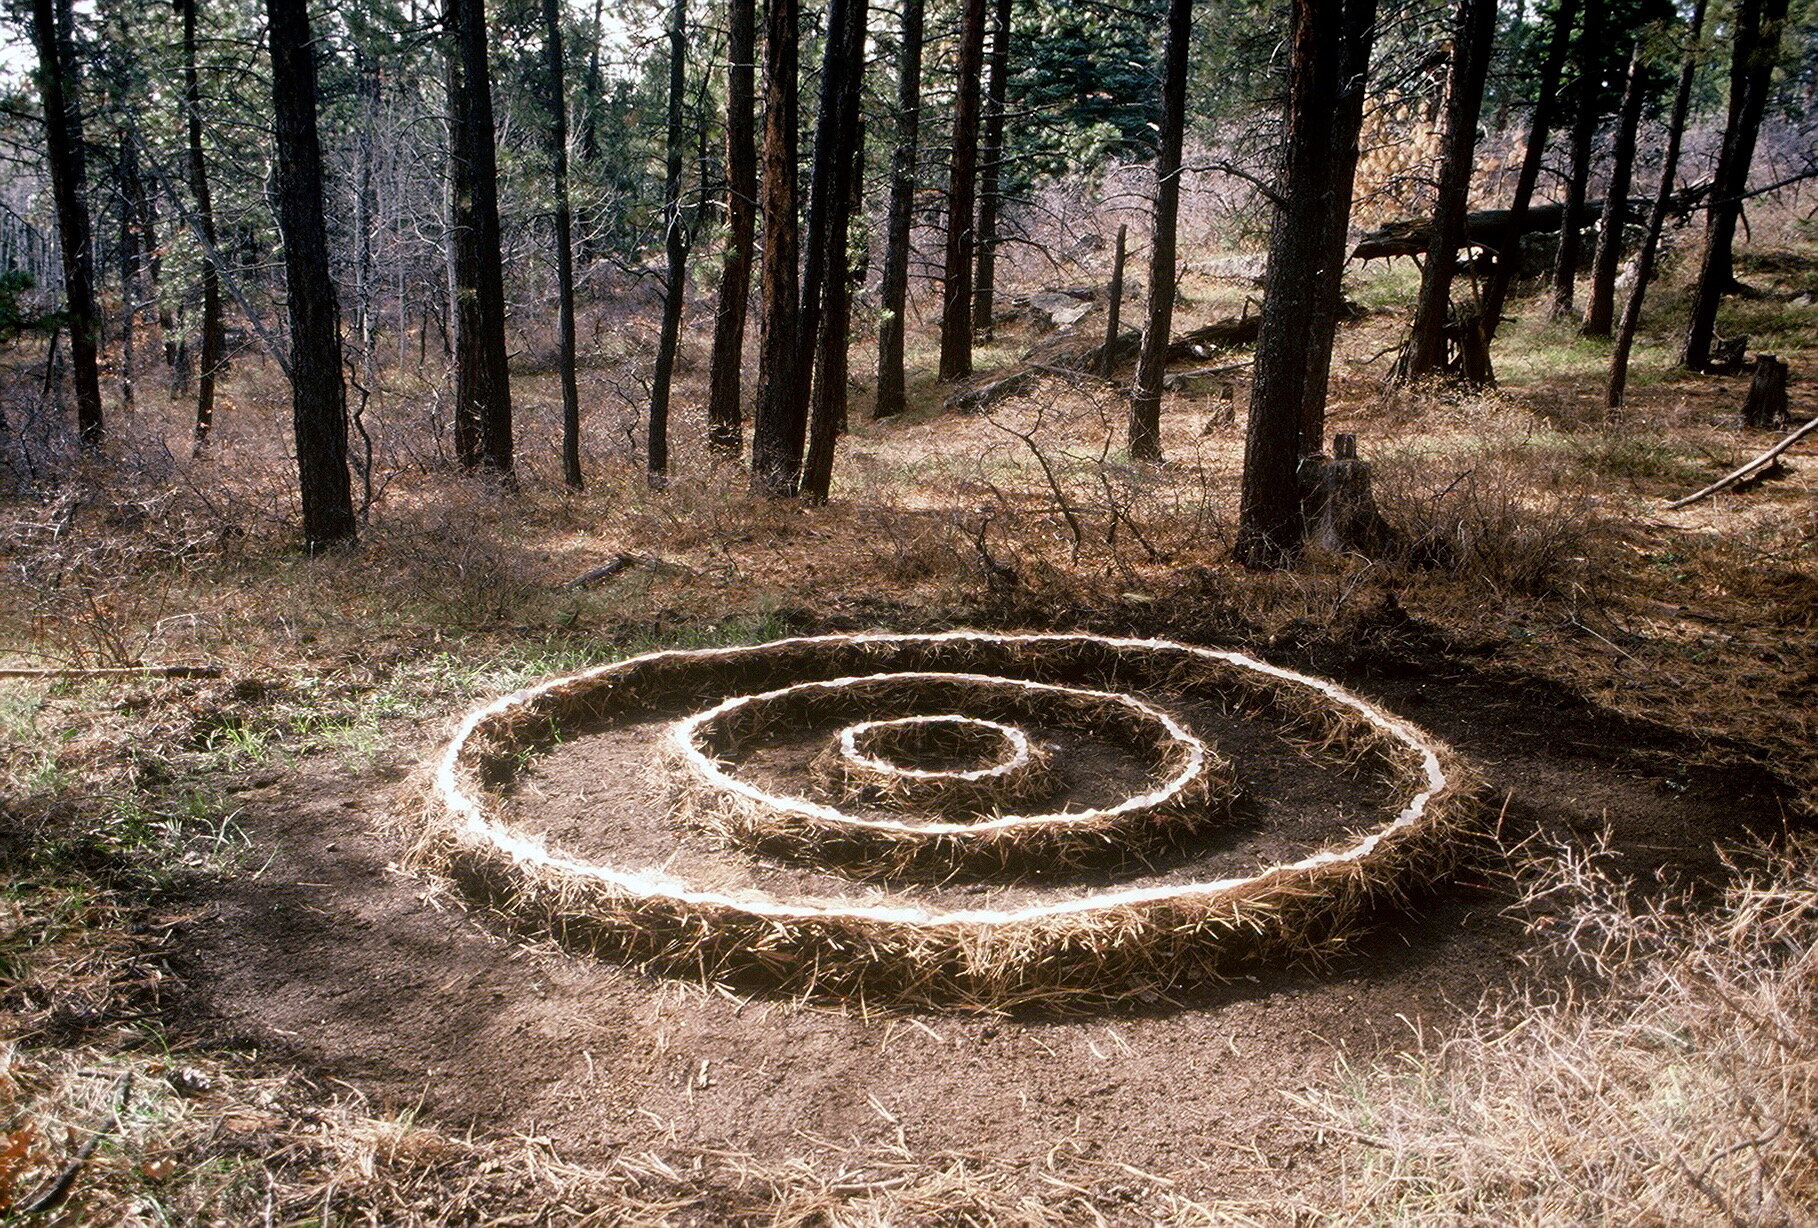 Concentric Circles, 1990's